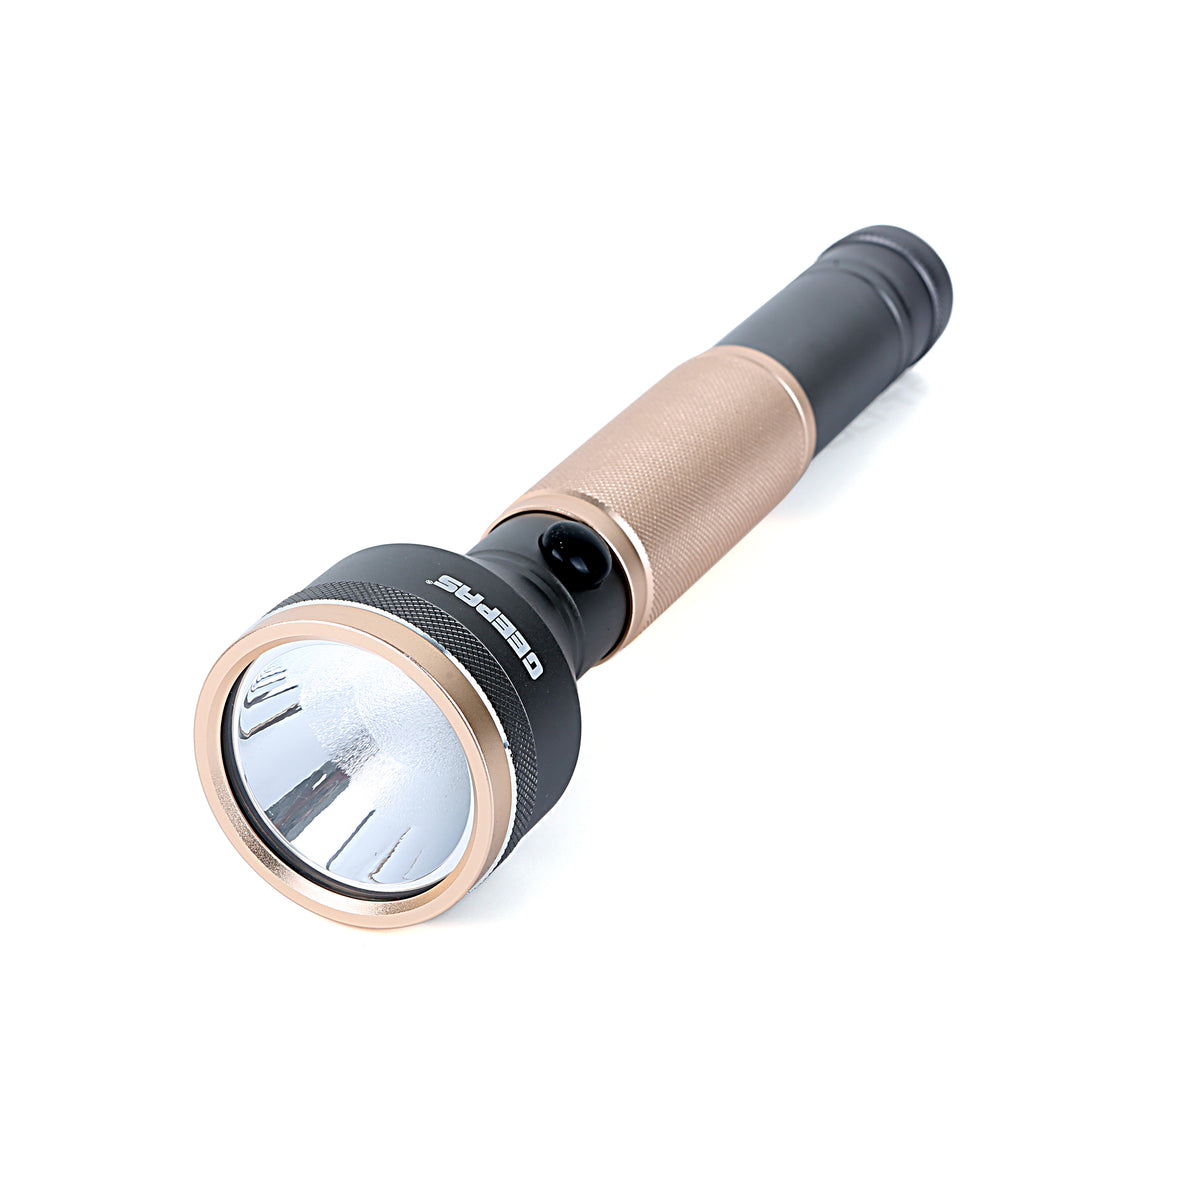 Geepas | For you. For life. Geepas Rechargeable LED Flashlight with Inbuilt Power Bank for USB Charging Flashlights